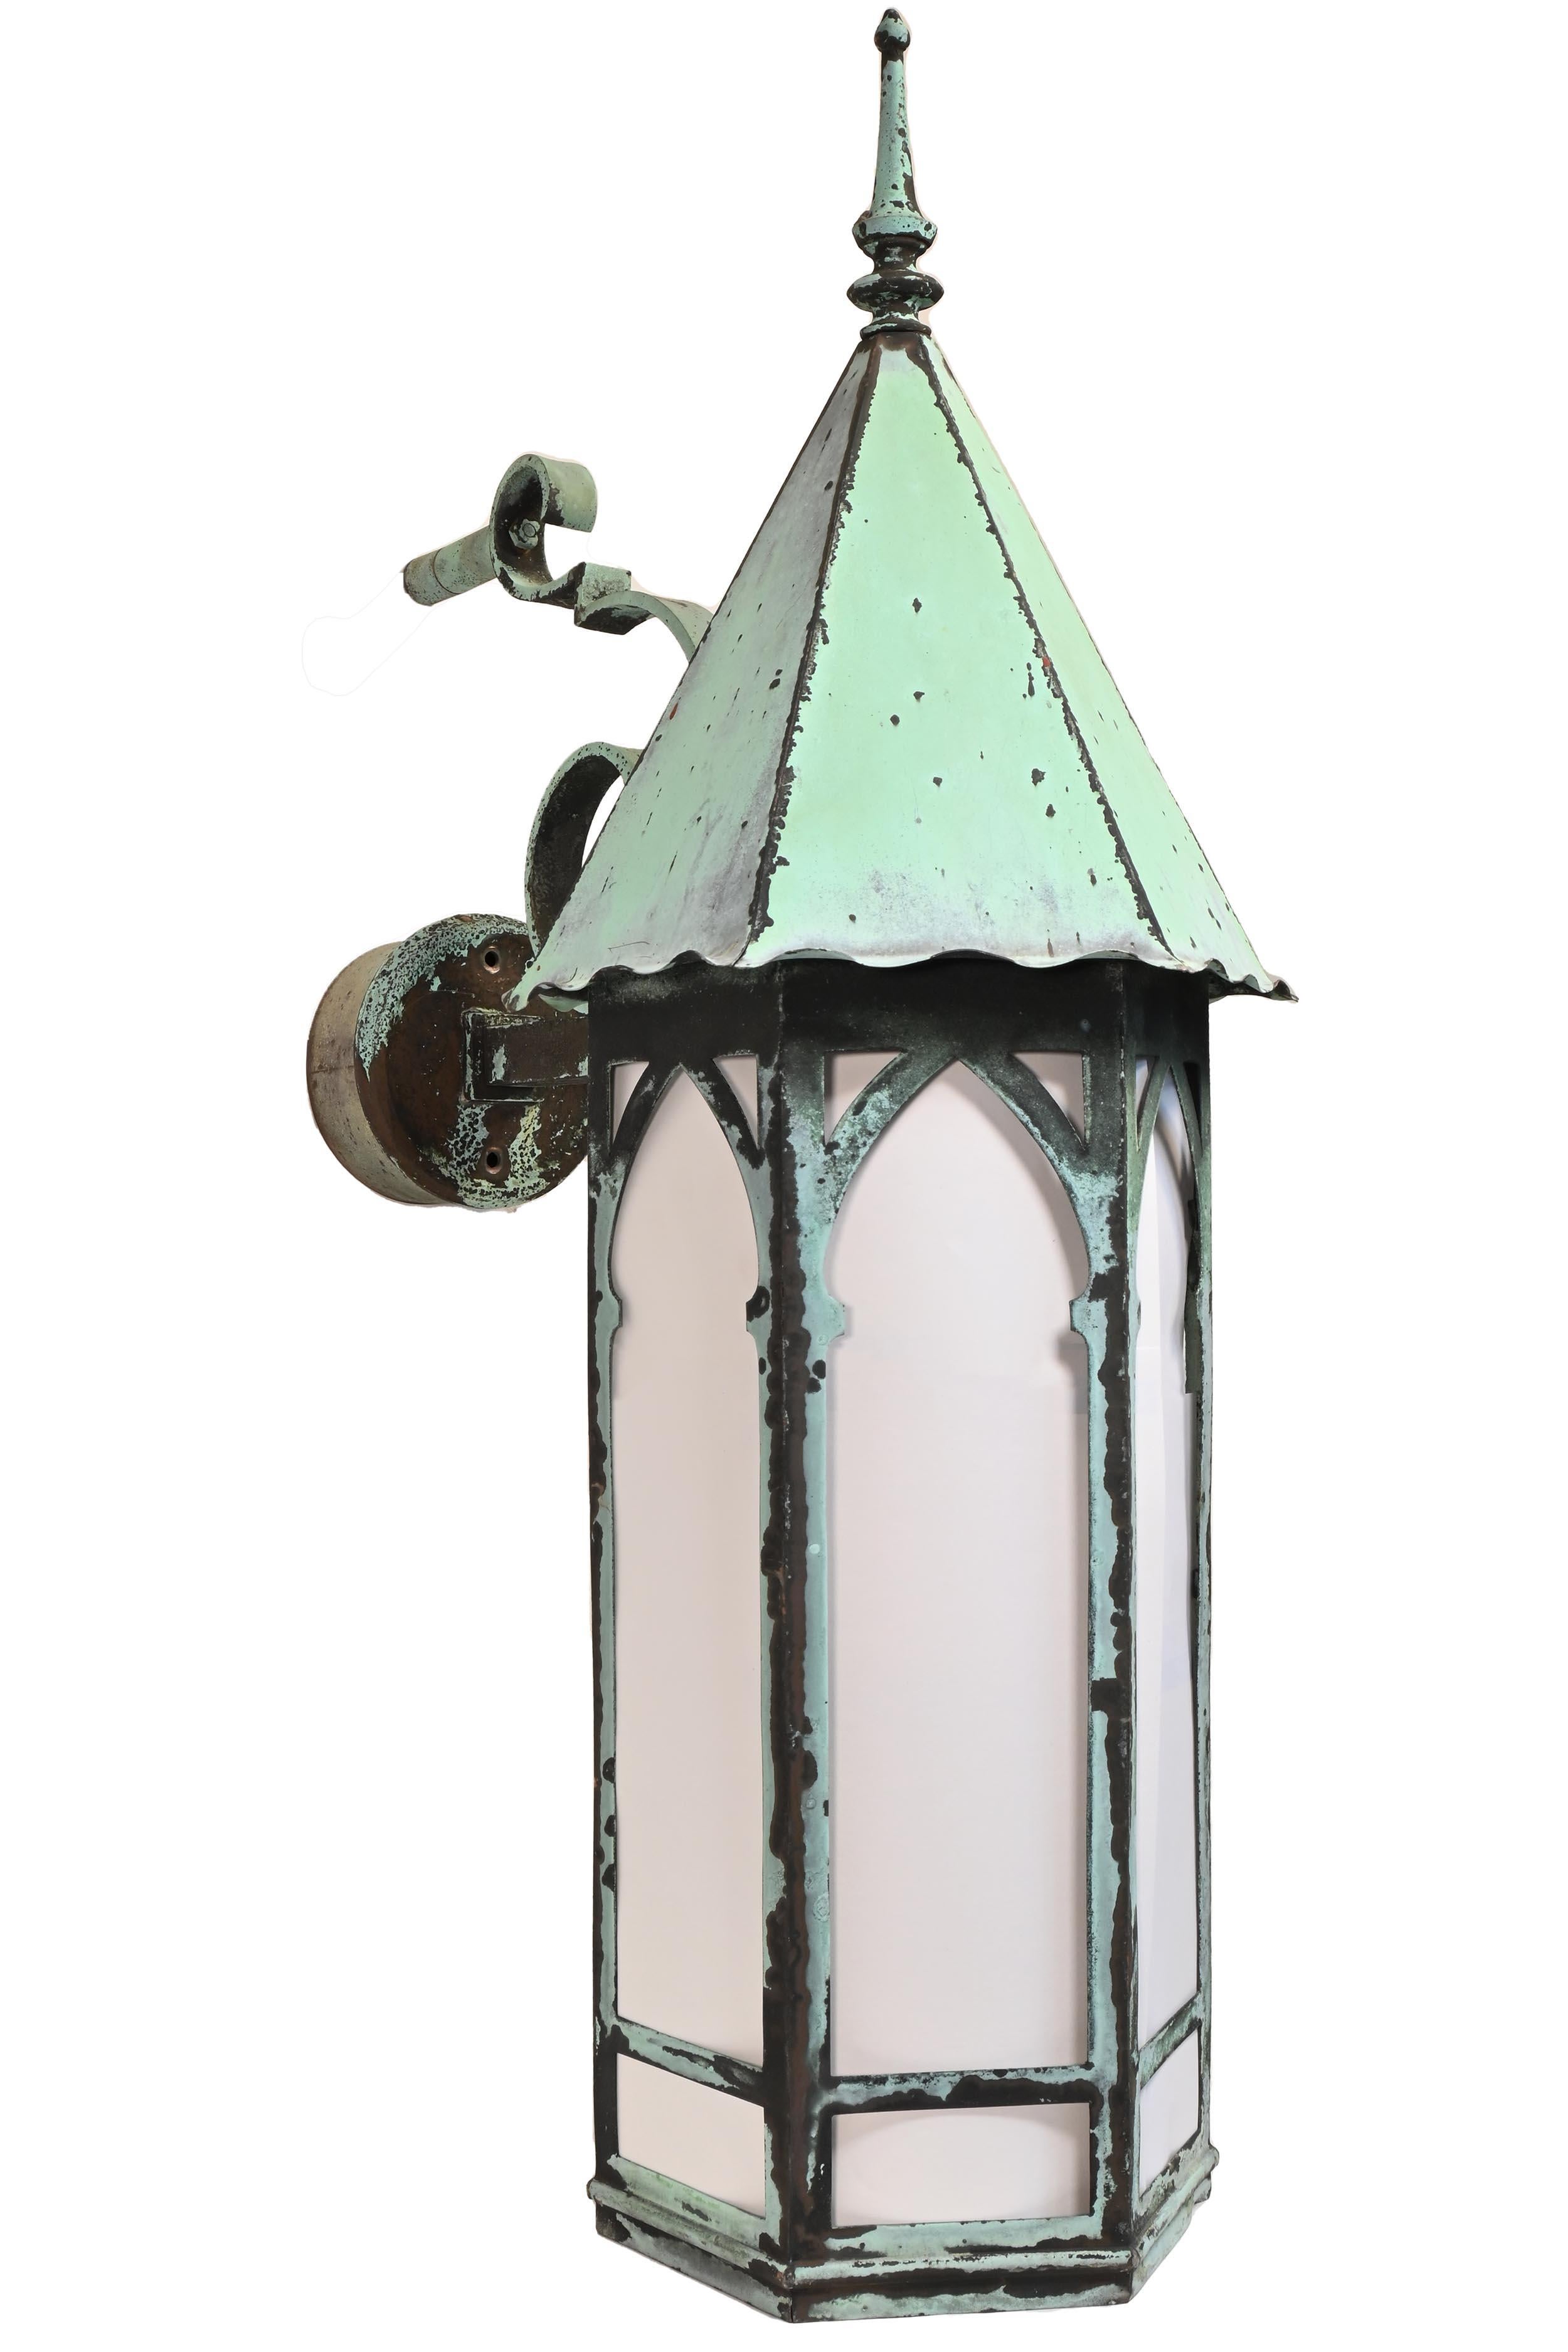 30 inch tall gothic copper steeple top entrance sconce

Copper Verdigris Patina
Sold Individually

AA# 61206

Large Copper exterior sconces perfect entrance lights for a private residence.

Circa: 1920’s
Condition: Age Consistent
Finish: